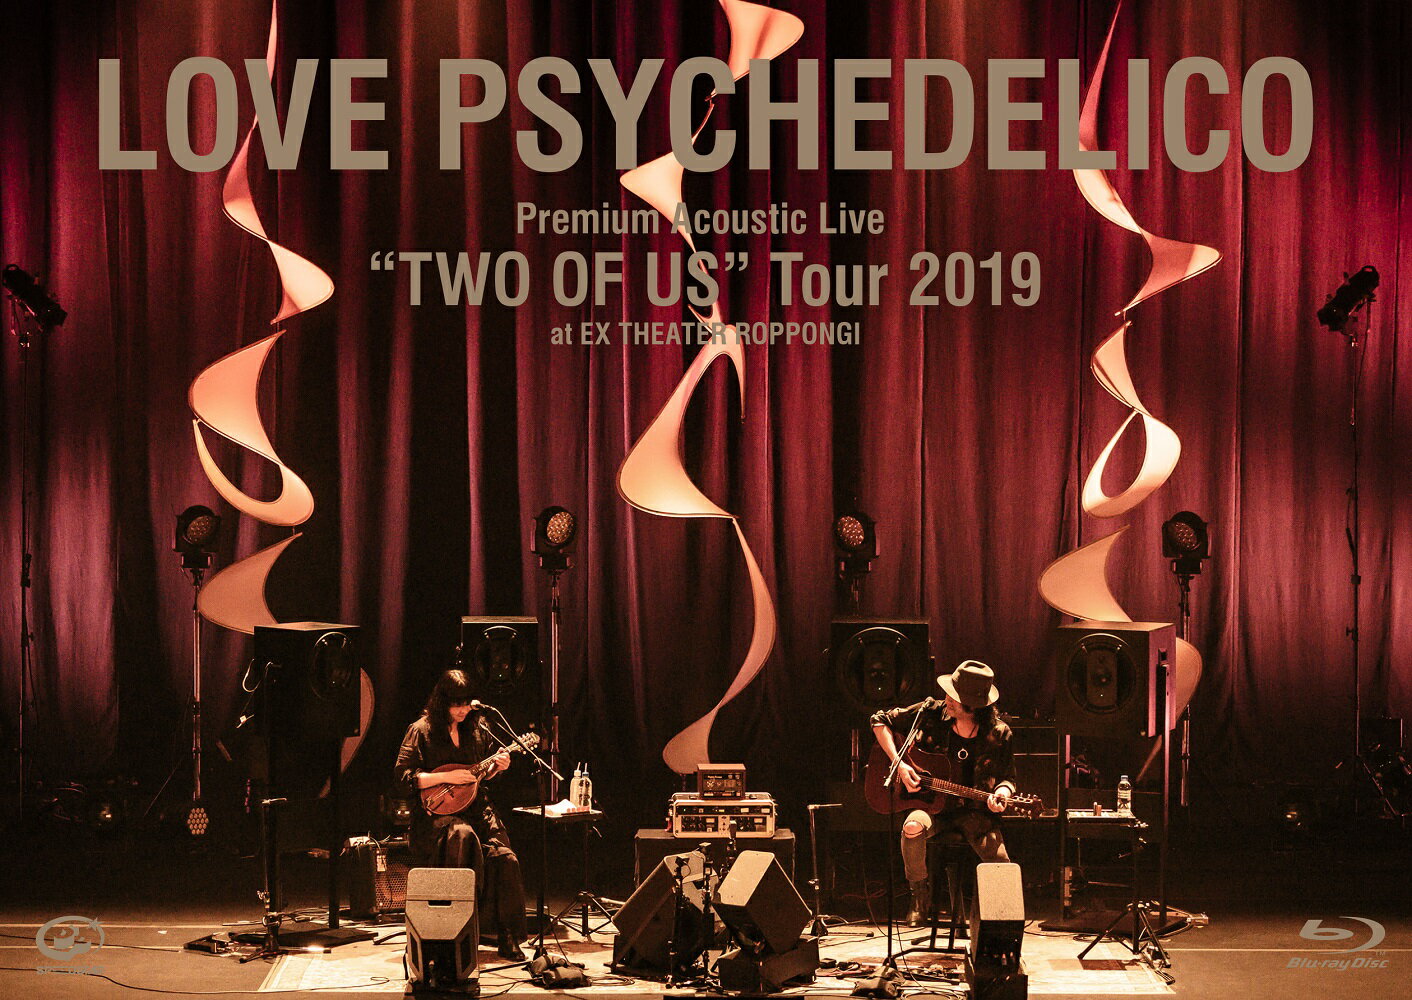 Premium Acoustic Live “TWO OF US” Tour 2019 at EX THEATER ROPPONGI【Blu-ray】 [ LOVE PSYCHEDELICO ]